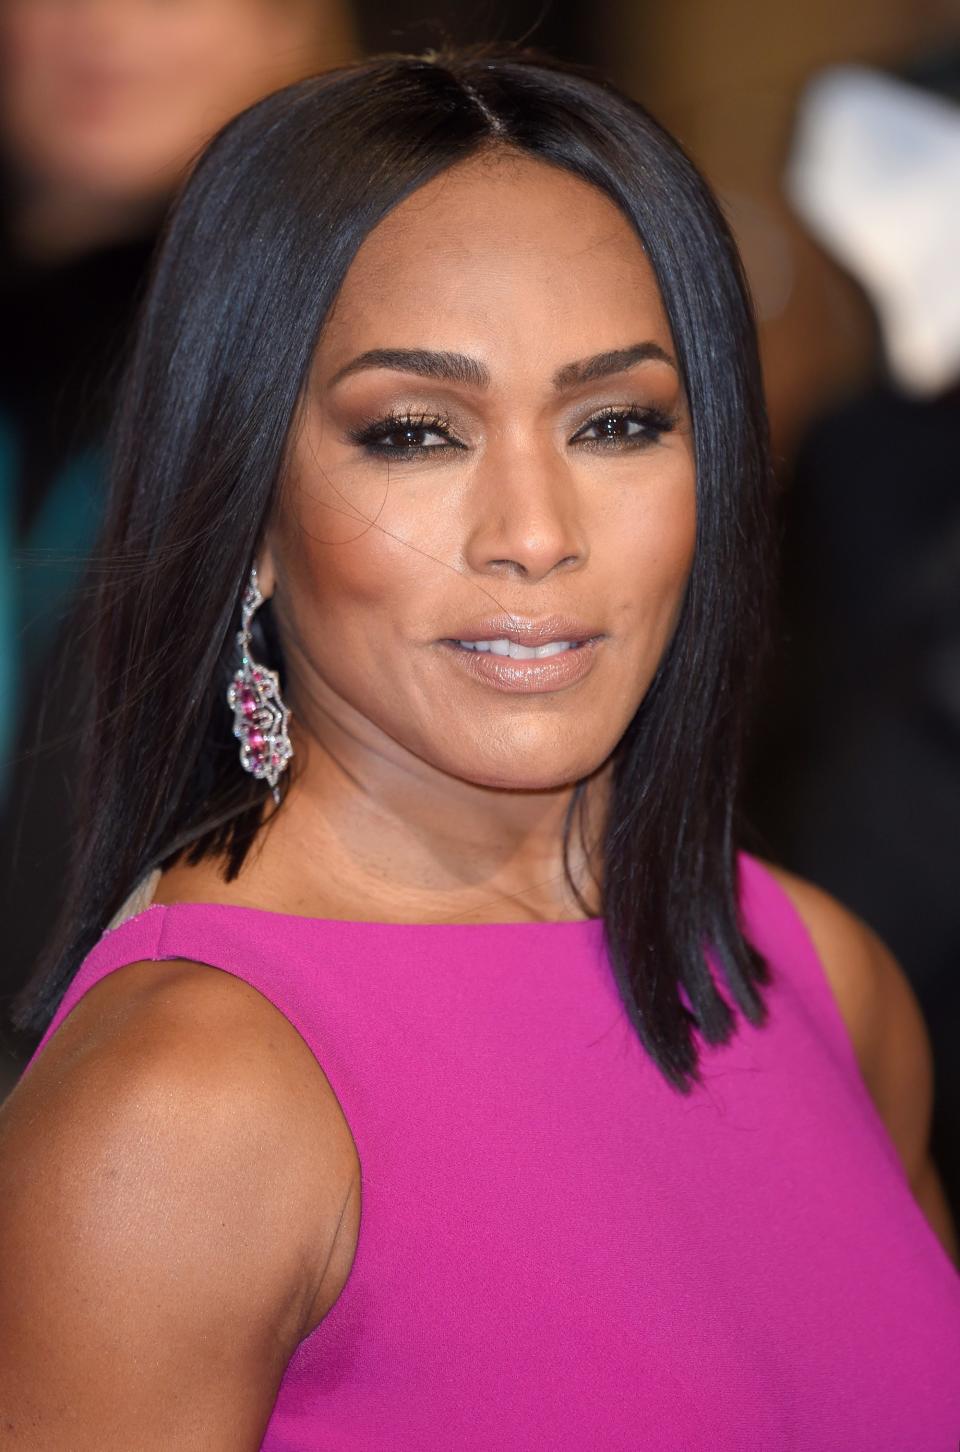 LONDON, ENGLAND - FEBRUARY 14:  Angela Bassett attends the EE British Academy Film Awards at The Royal Opera House on February 14, 2016 in London, England.  (Photo by Karwai Tang/WireImage)